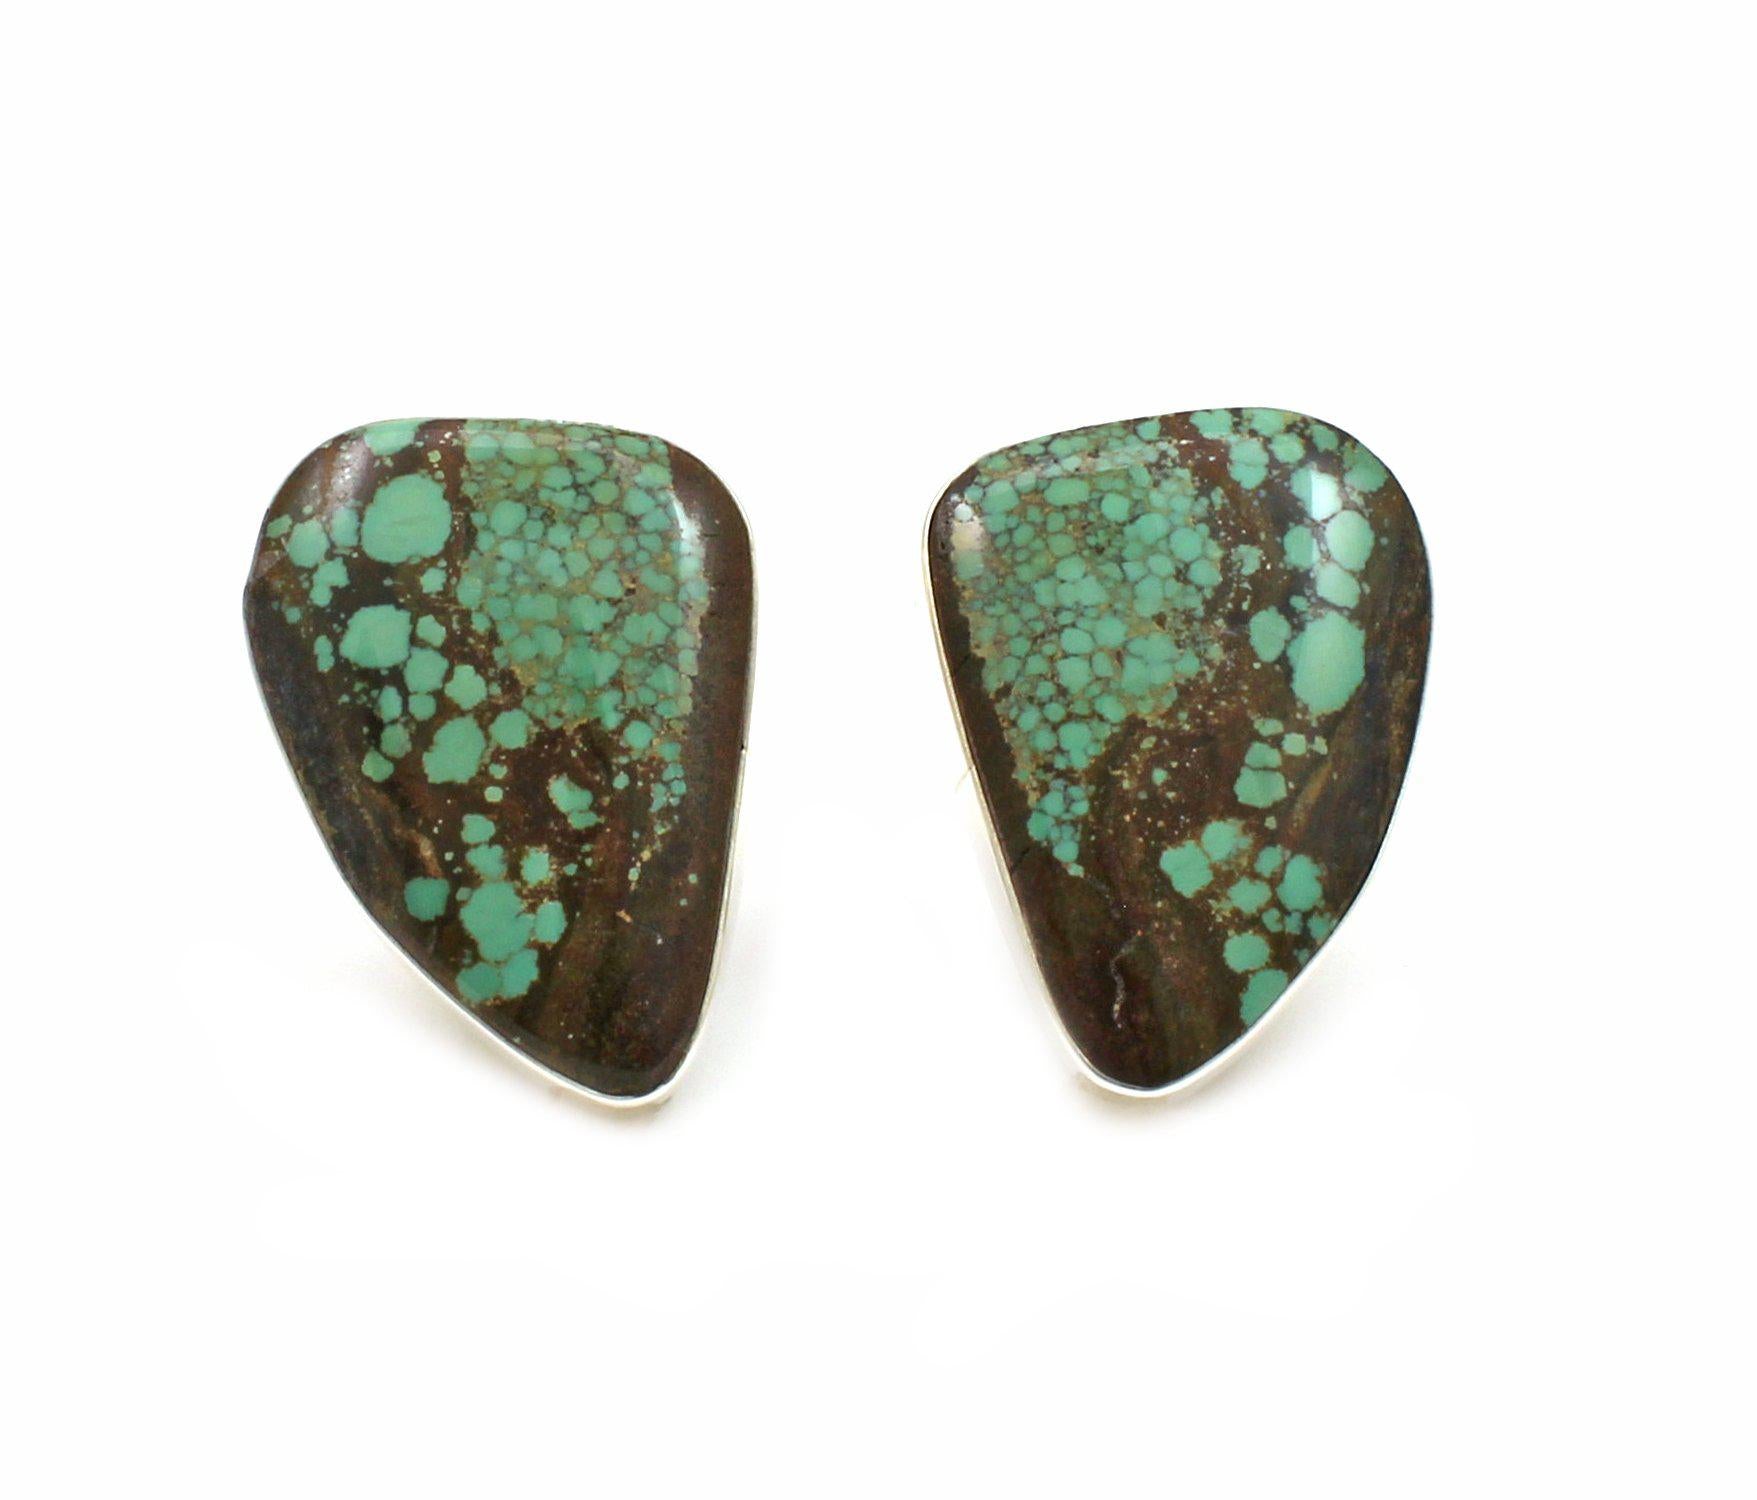 Turquoise Clip On Earrings-Jewelry-Pam Springall-Sorrel Sky Gallery